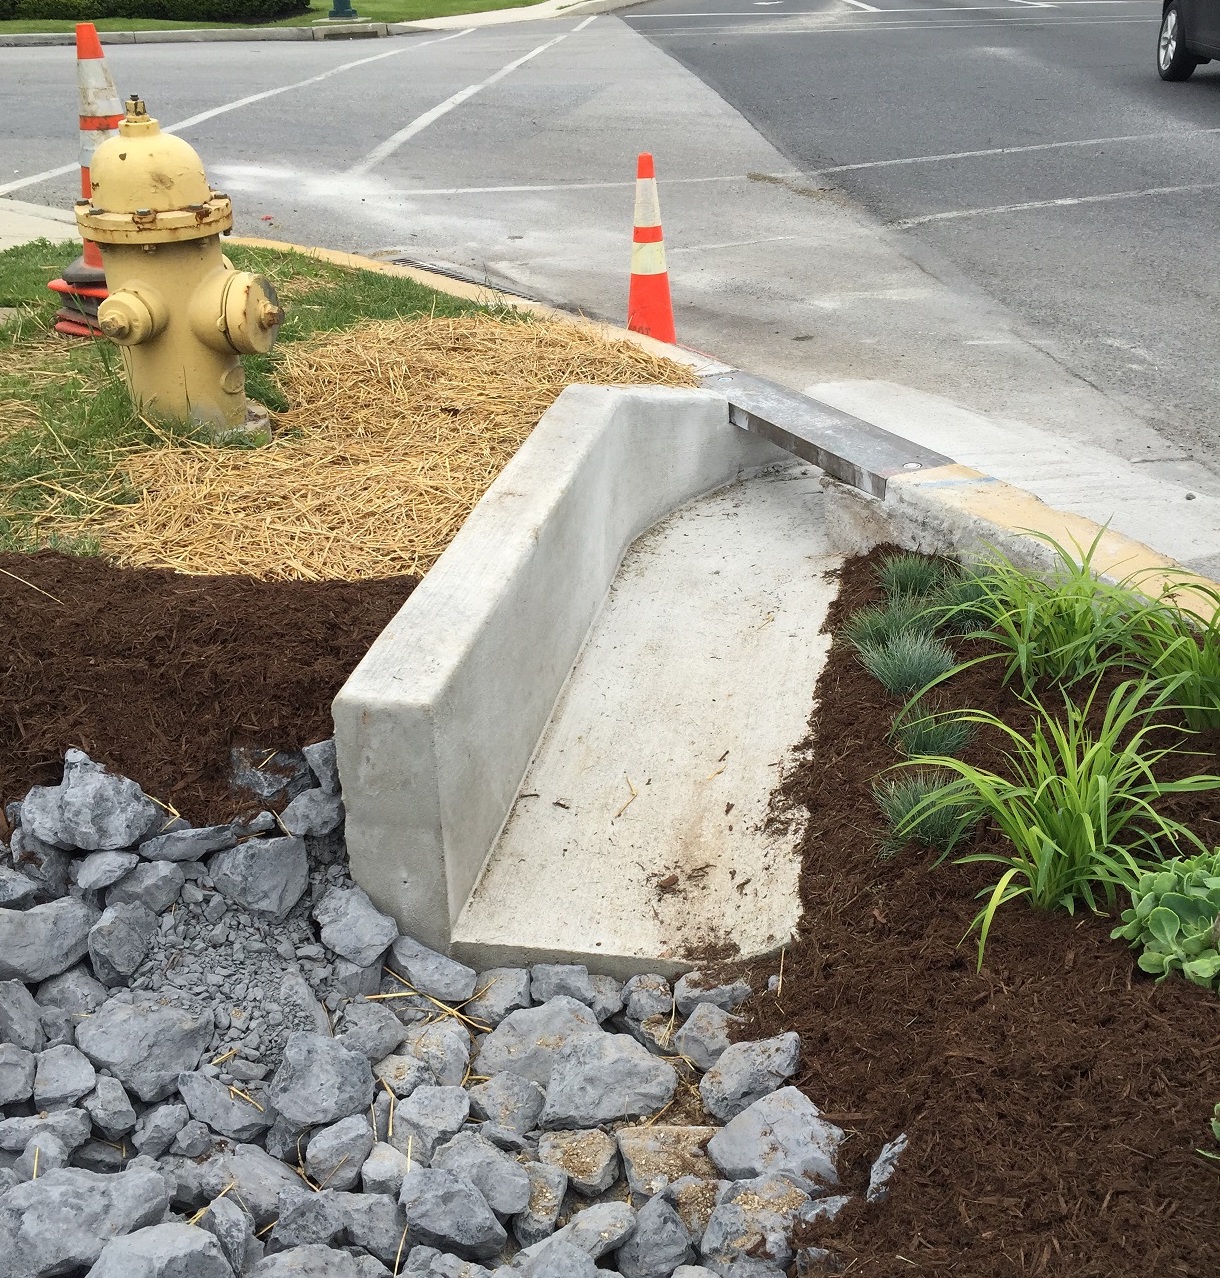 A stormwater control measure along a road helps to protect the environment by giving stormwater a place to easily drain, improving roadway conditions for drivers. 